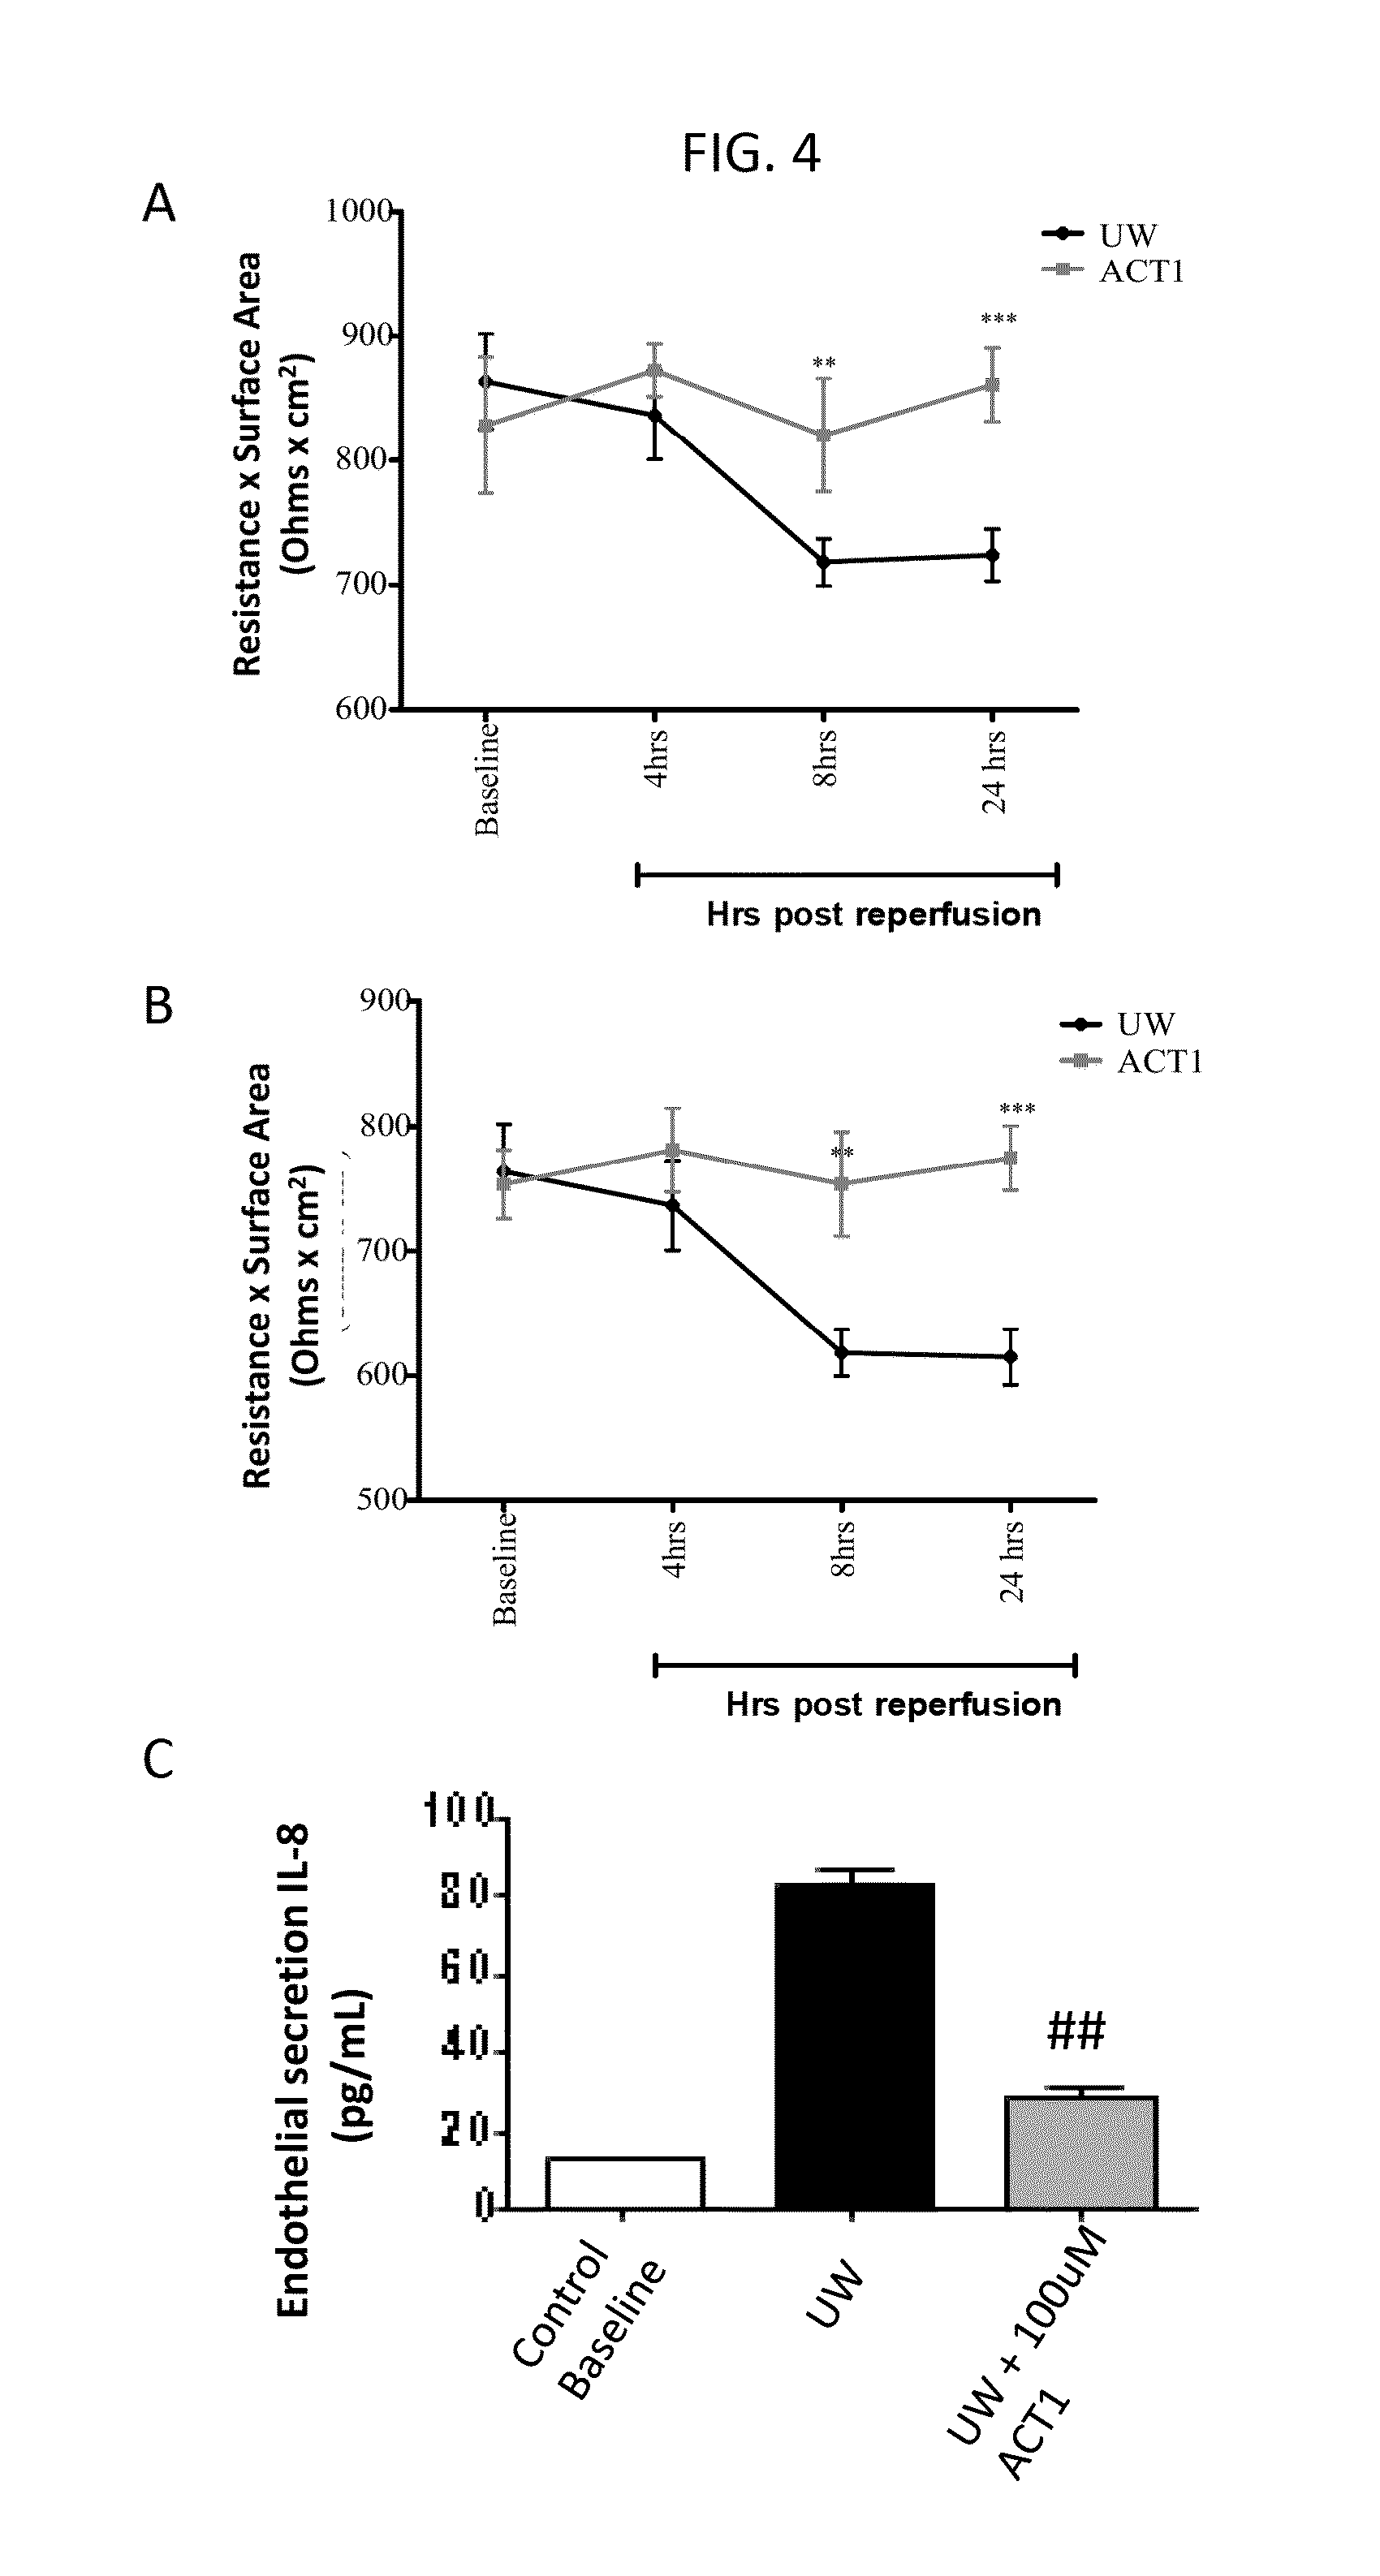 Alpha Connexin c-Terminal (ACT) peptides for use in transplant